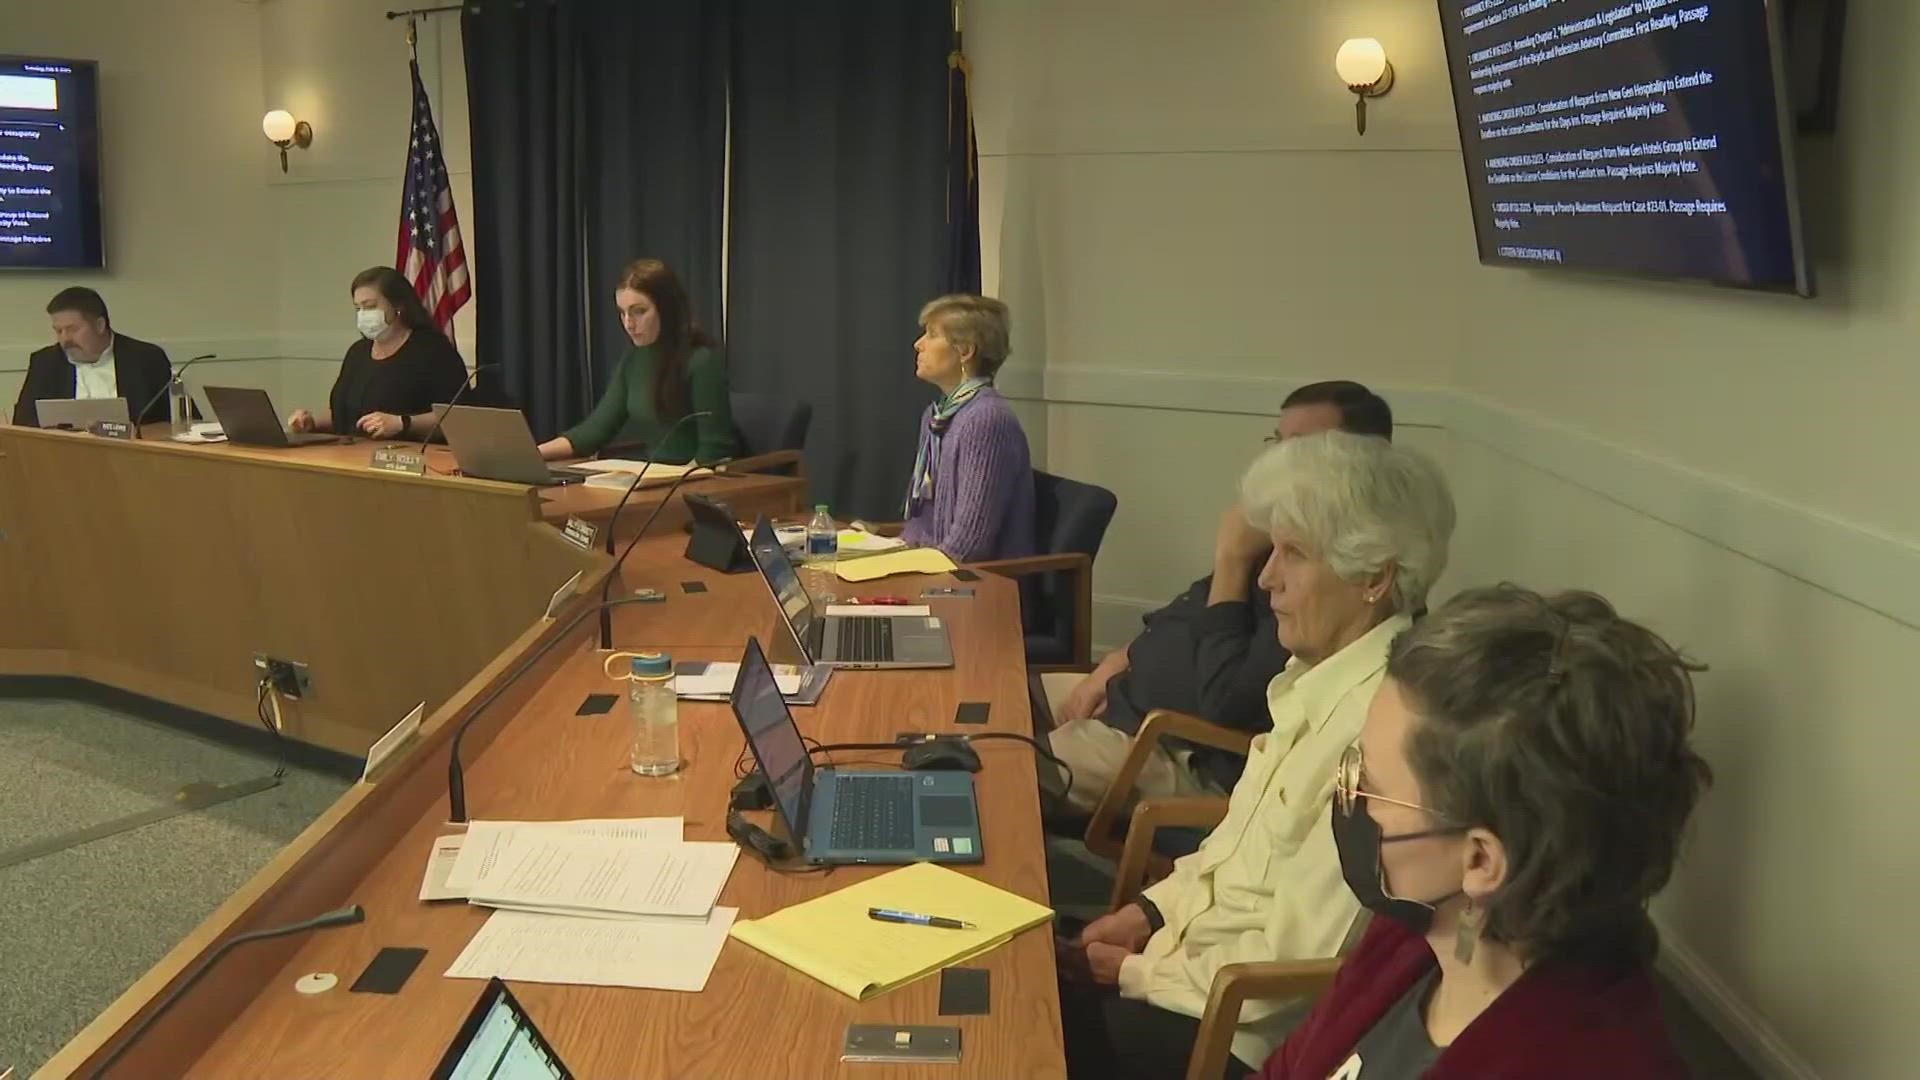 Portland city councilors voted in favor of extending the license for the Days Inn emergency shelter, but have yet to vote on the Comfort Inn license extension.